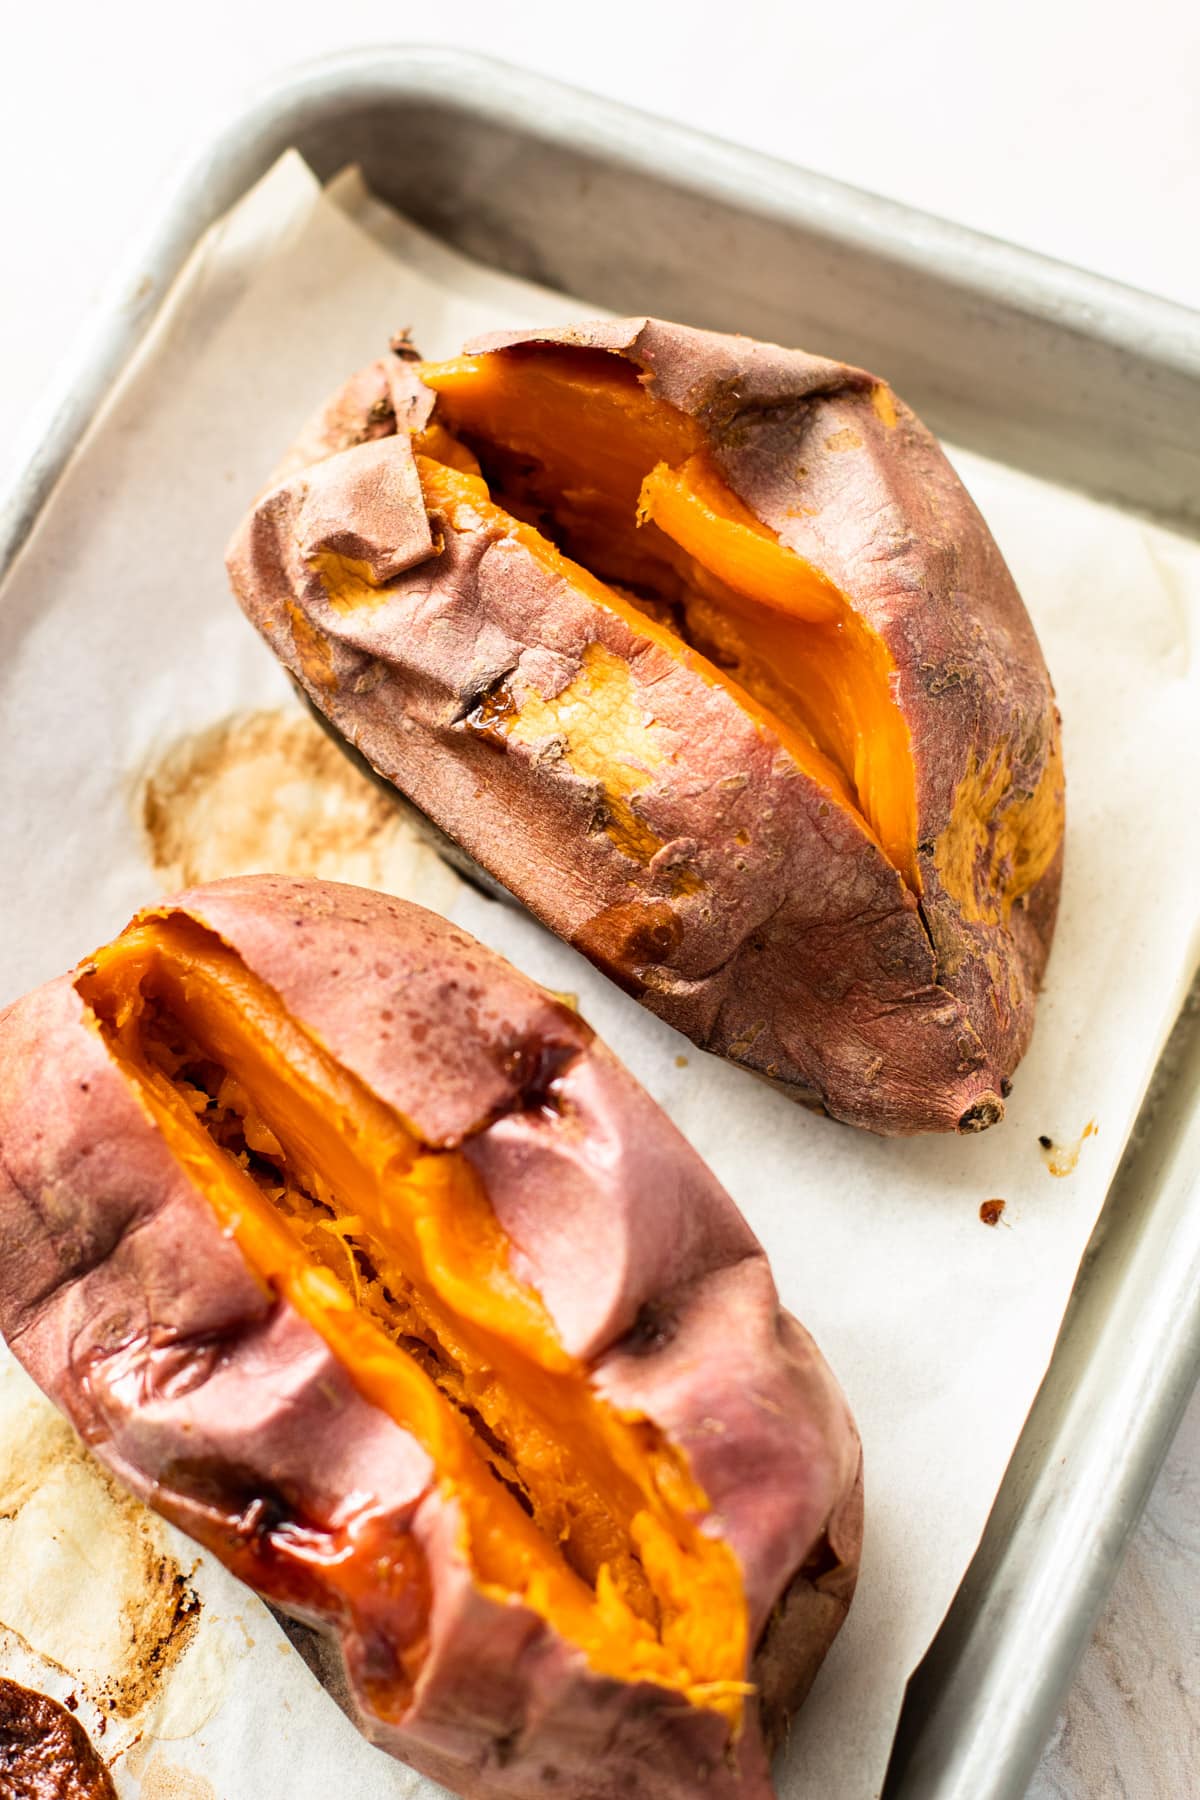 Roasted sweet potatoes for pie.